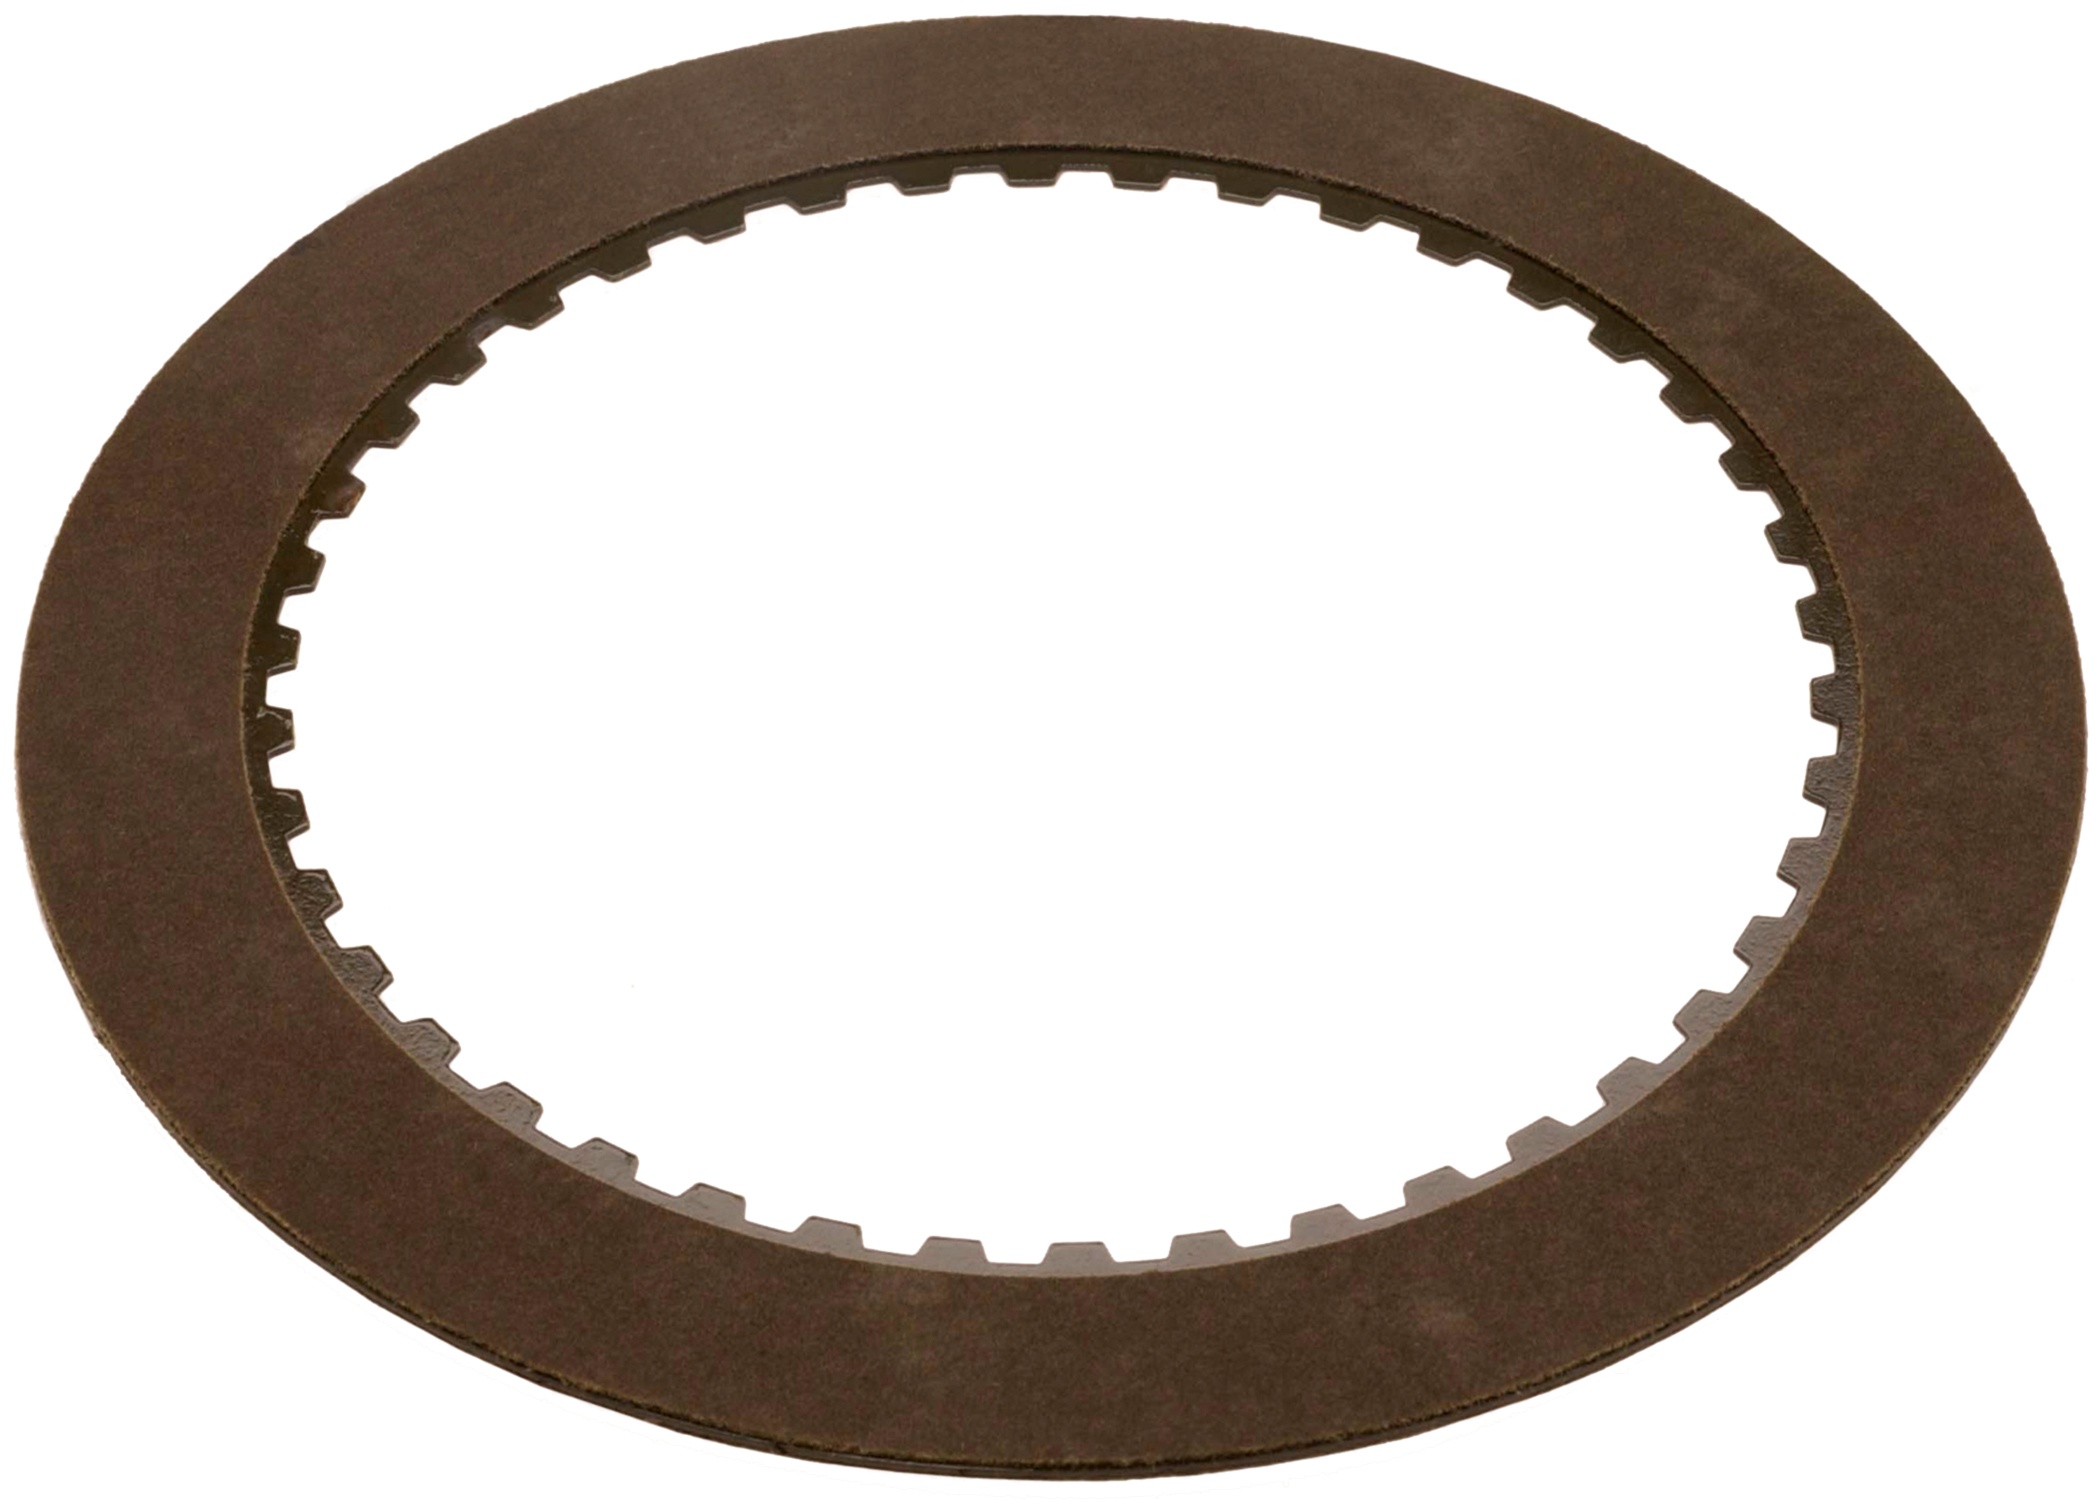 GM GENUINE PARTS - Transmission Clutch Friction Plate (Forward) - GMP 24202646